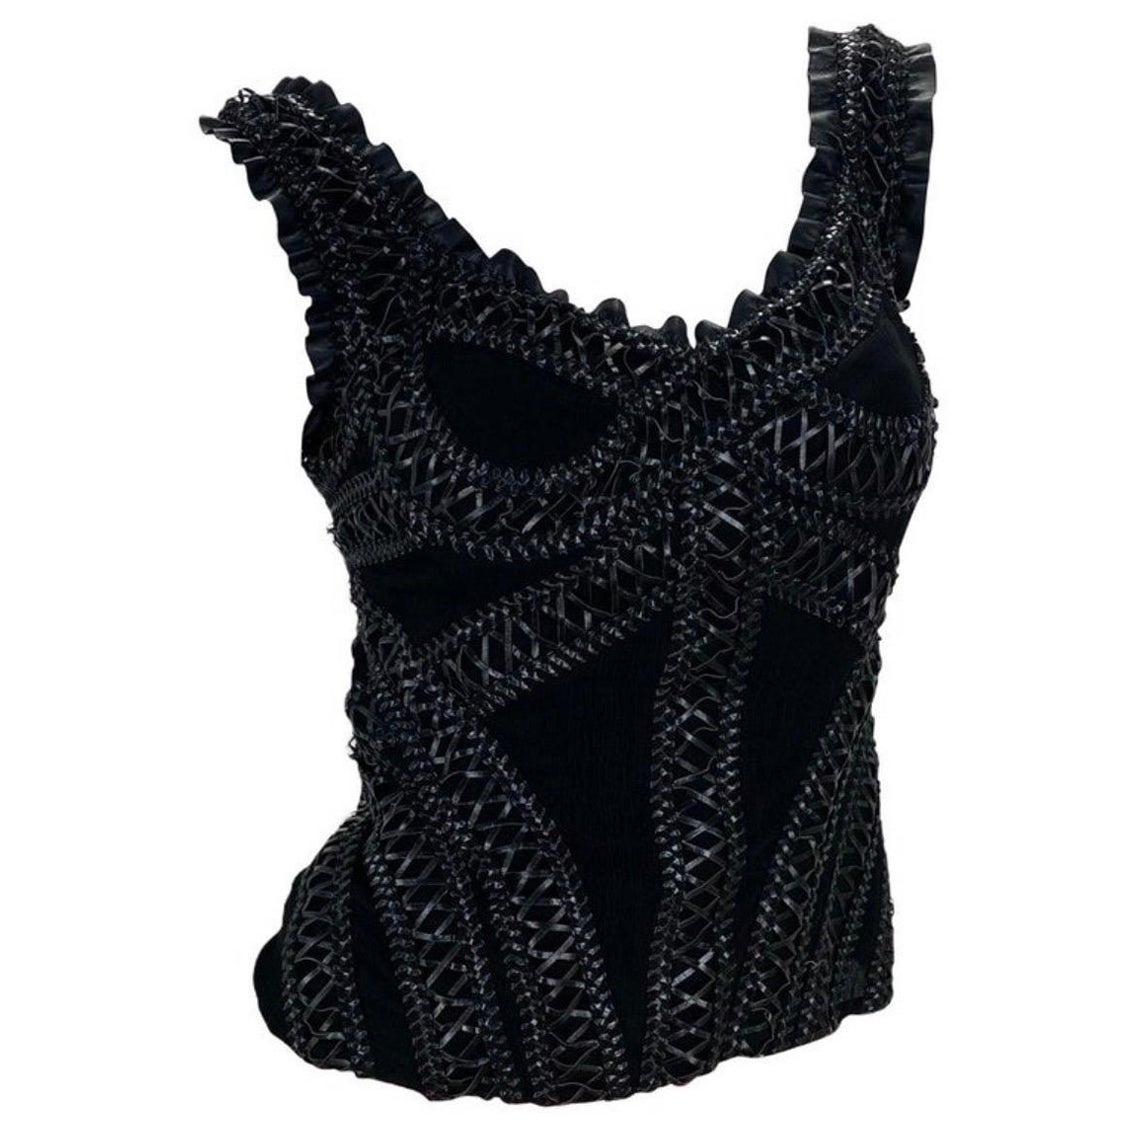 2004 Vintage Alexander McQueen Black Silk and Leather Corset Top For Sale